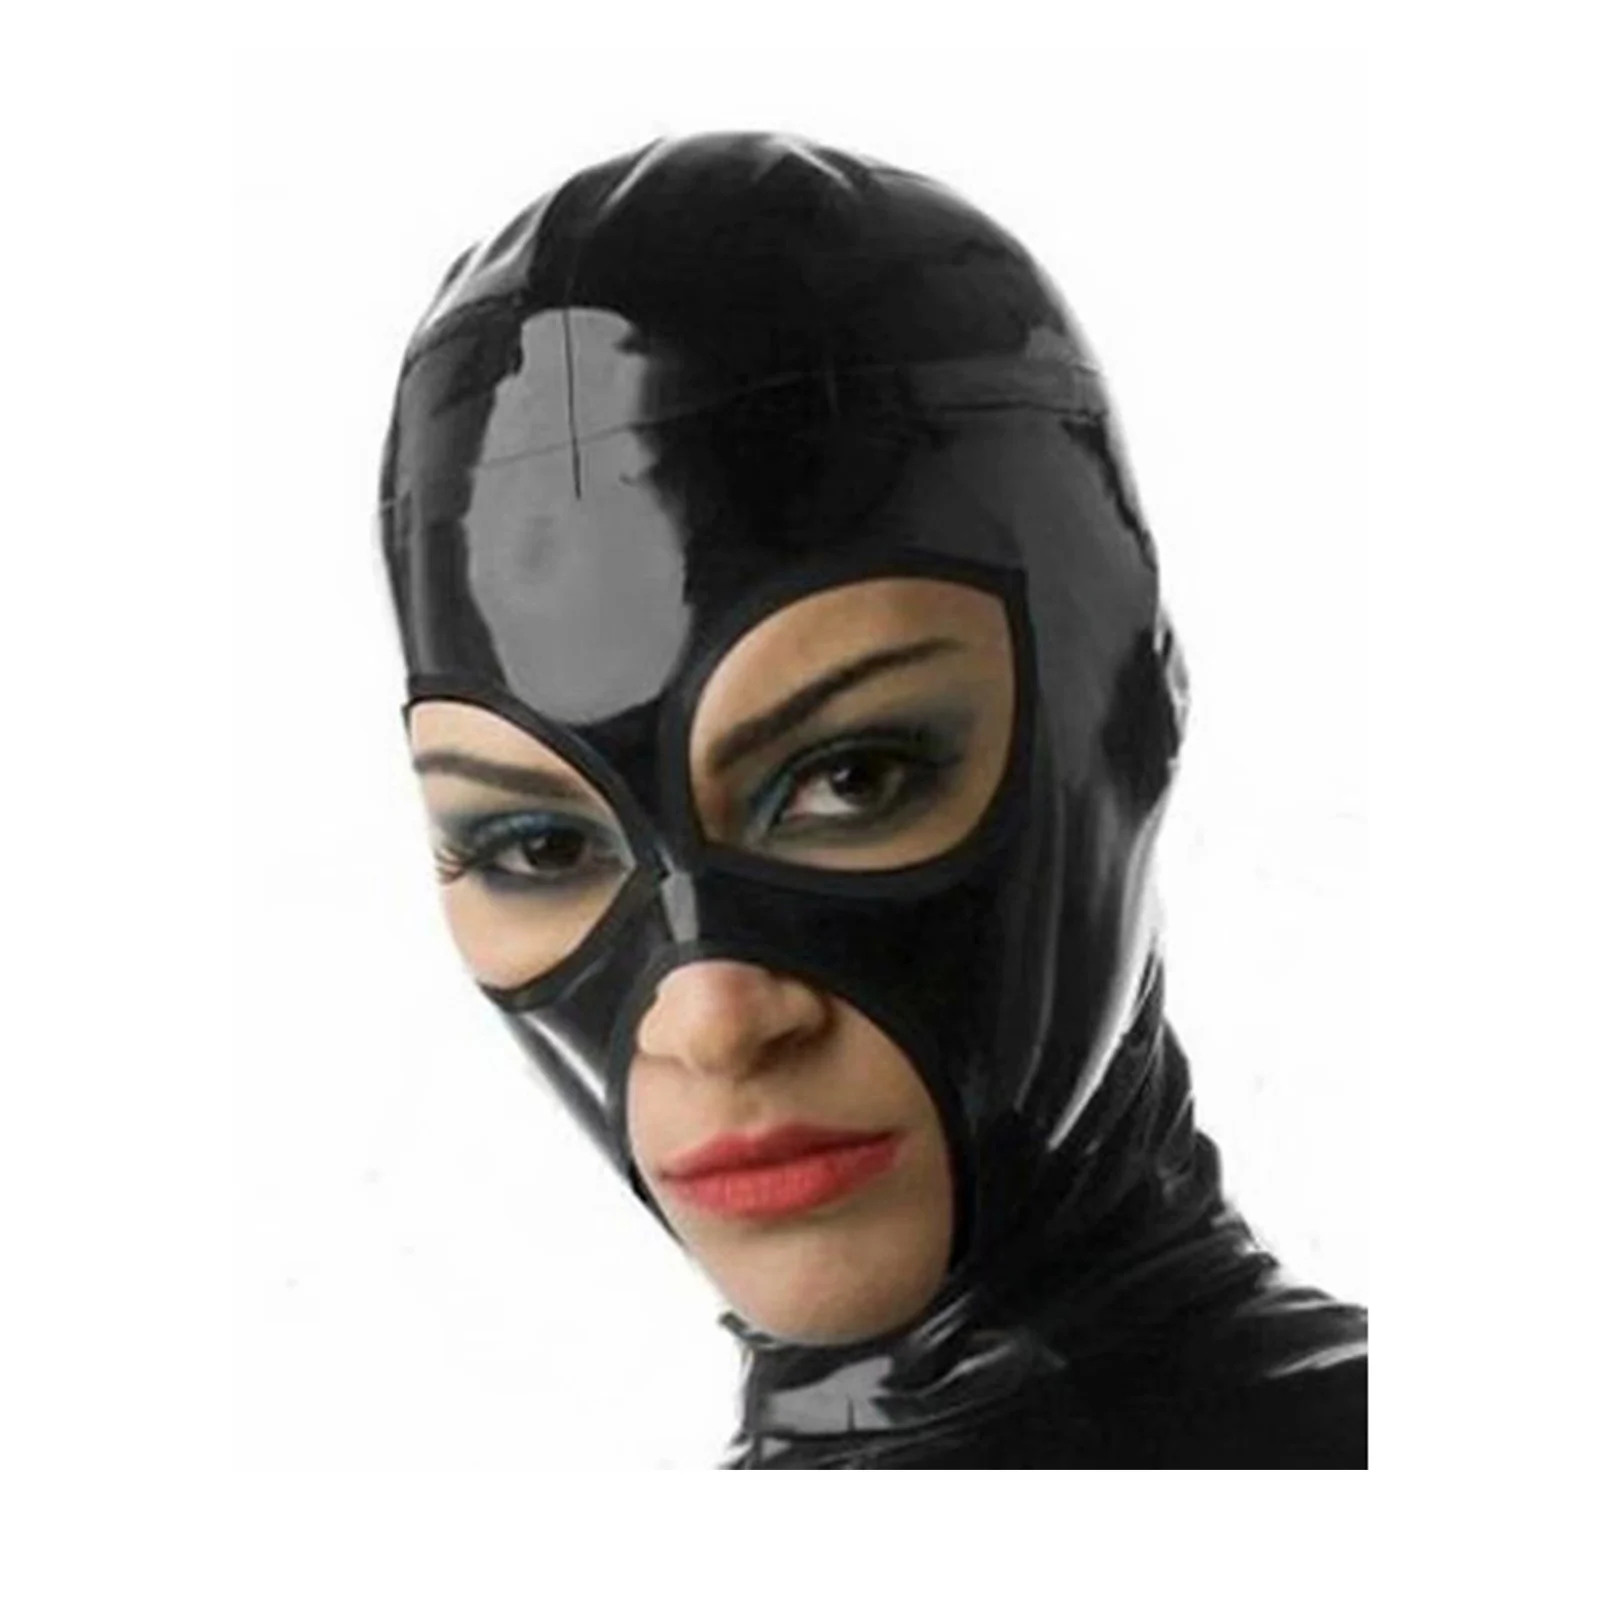 monnik-latex-mask-black-rubber-unisex-hood-open-eyes-and-mouth-handmade-for-latex-fetish-party-catsuit-halloween-clubwear